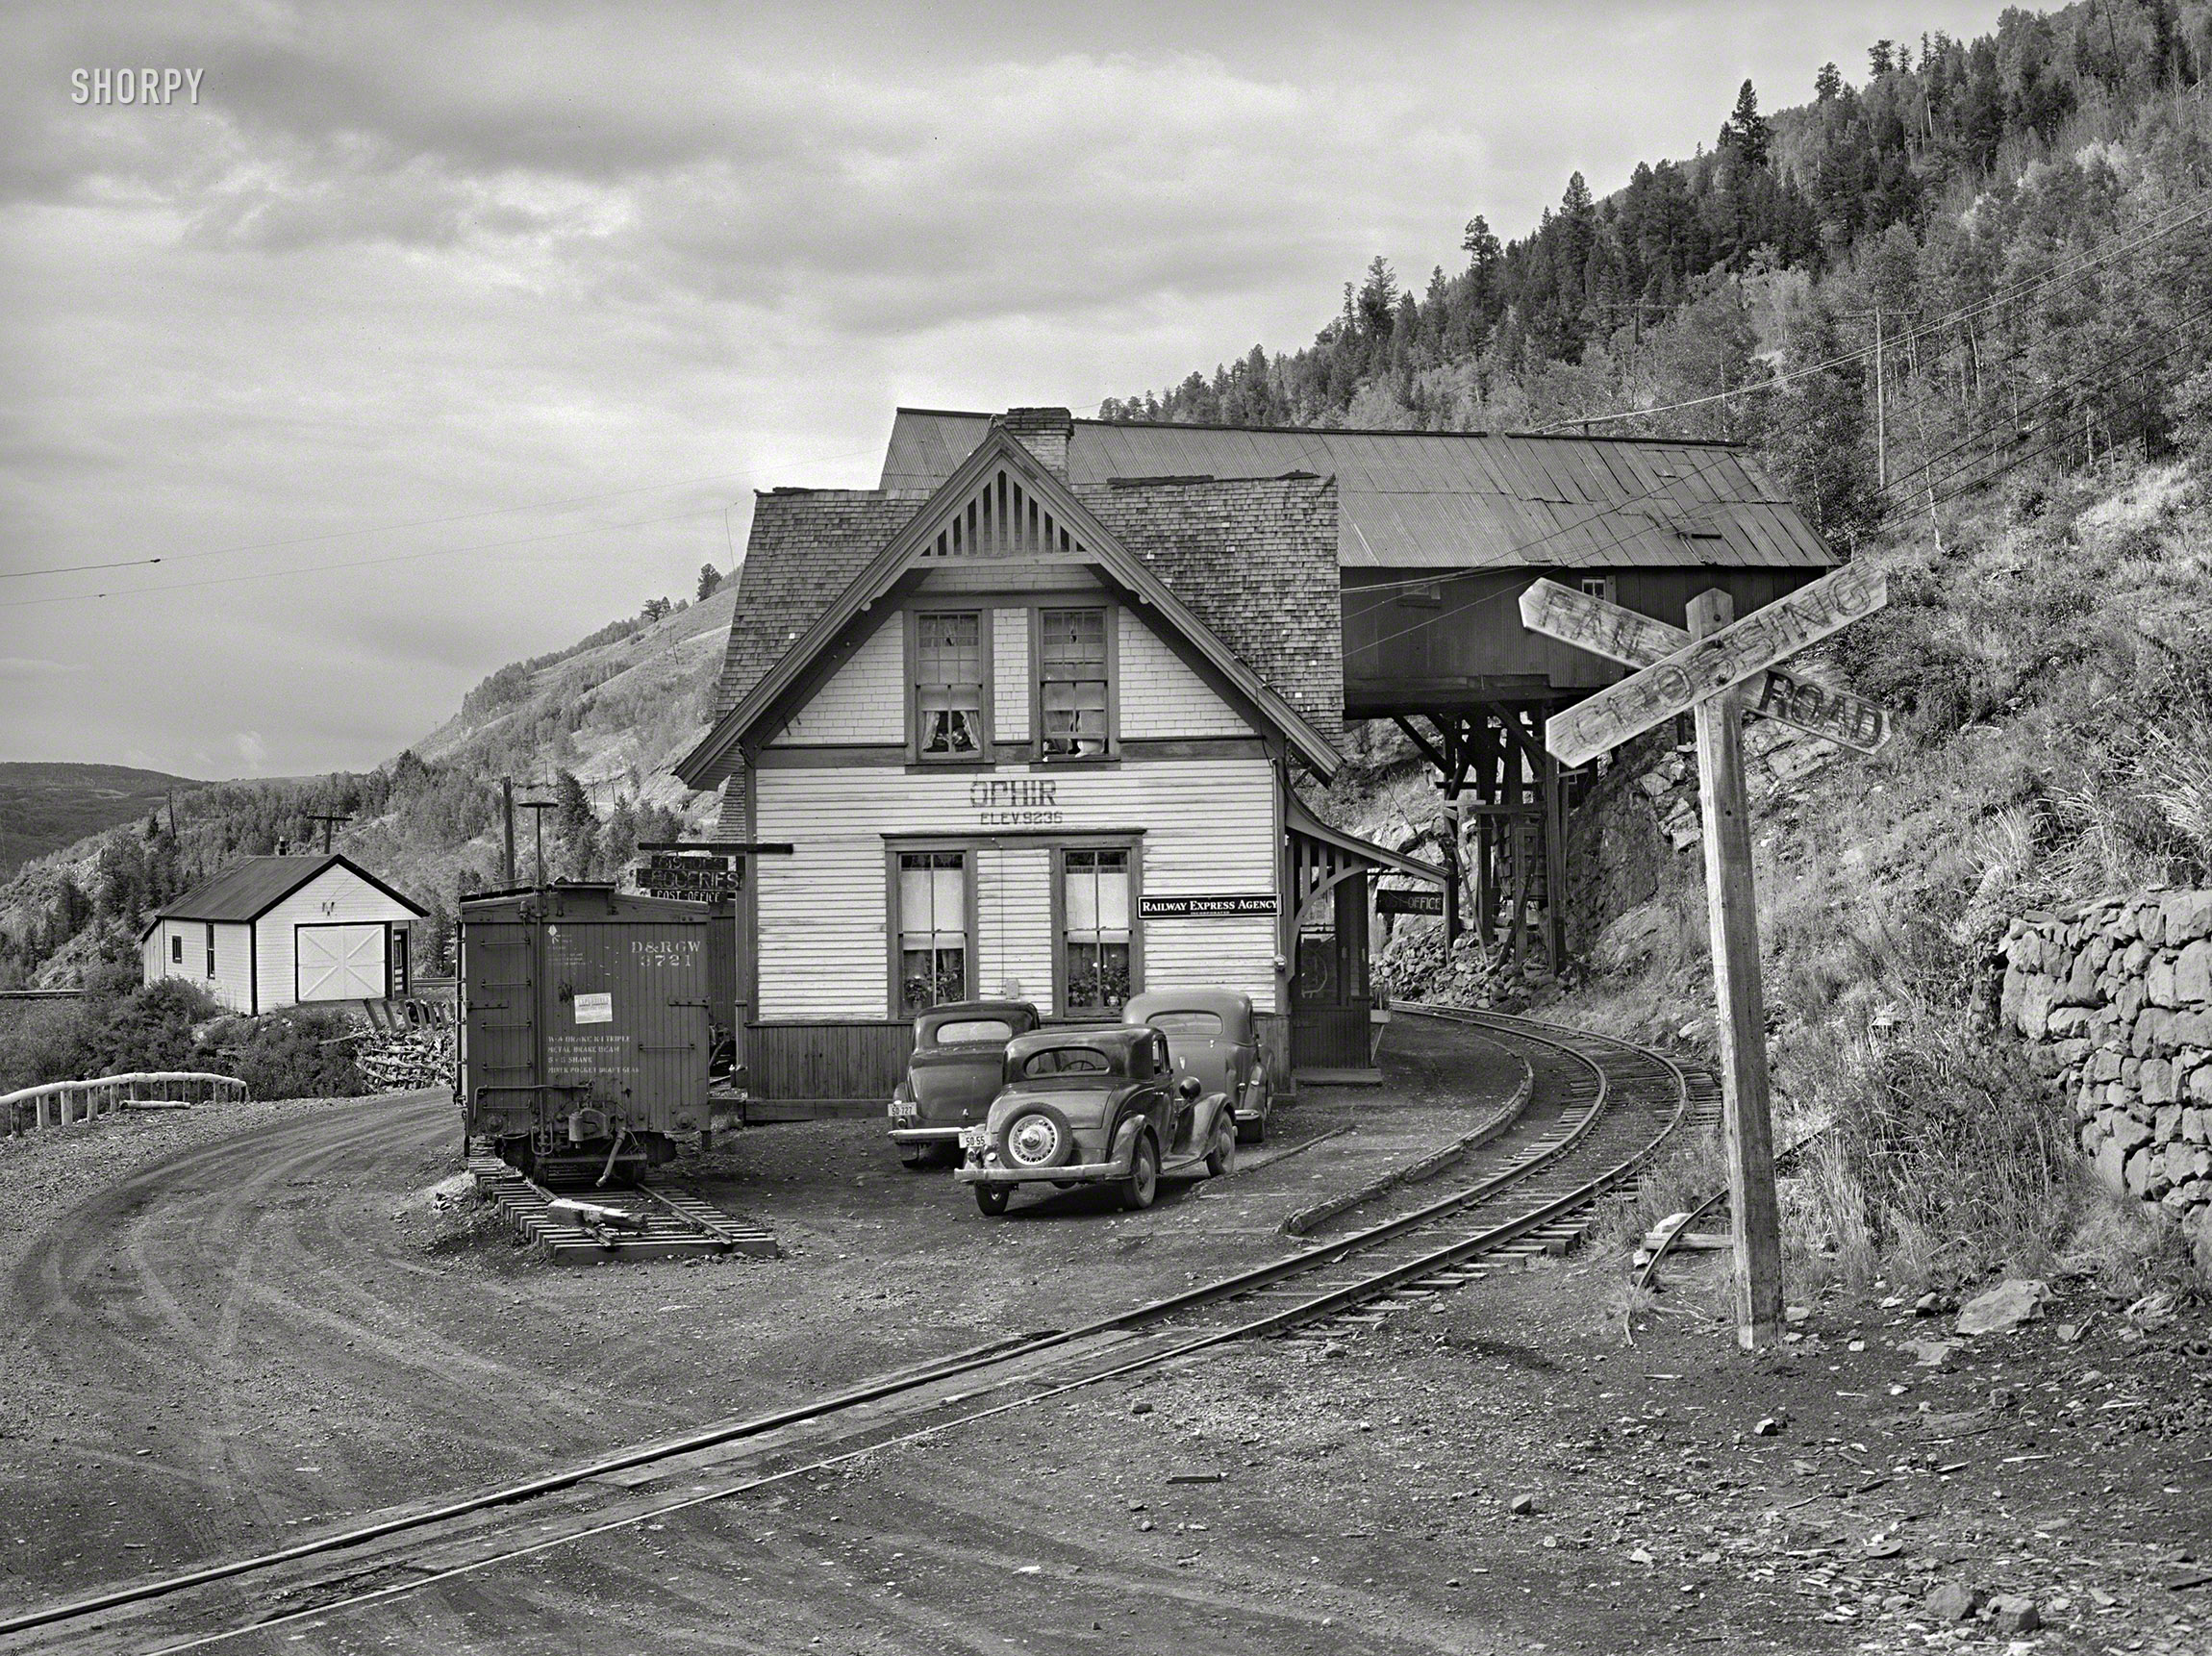 September 1940. "Railway station at Ophir, Colorado, a small gold mining town. A narrow-gauge railway runs into the town with supplies and takes out the ore." Photo by Russell Lee for the Farm Security Administration. View full size.